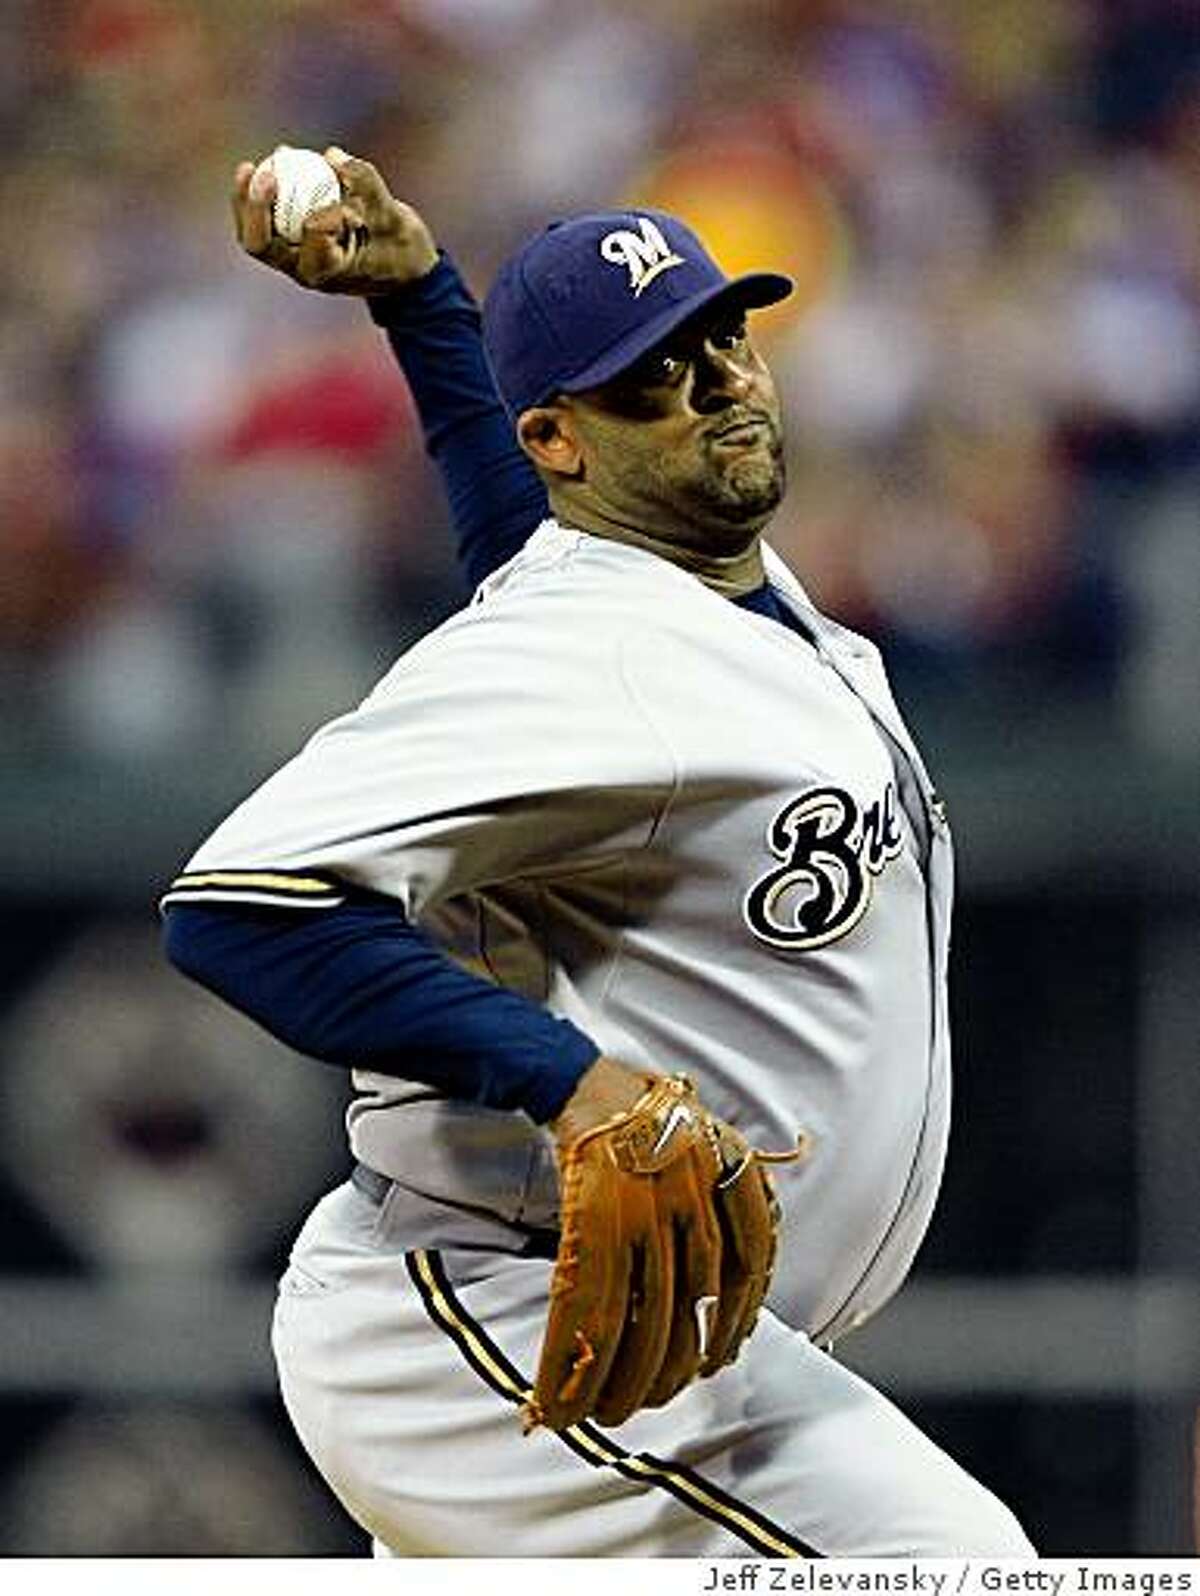 PHILADELPHIA - OCTOBER 02: CC Sabathia #52 of the Milwaukee Brewers delivers in Game 2 of the NLDS Playoff against the Philadelphia Phillies at Citizens Bank Ballpark on October 2, 2008 in Philadelphia, Pennsylvania. According to reports December 10, 2008, Sabathia is close to signing a seven-year deal with the New York Yankees worth 160 million dollars. (Photo by Jeff Zelevansky/Getty Images)